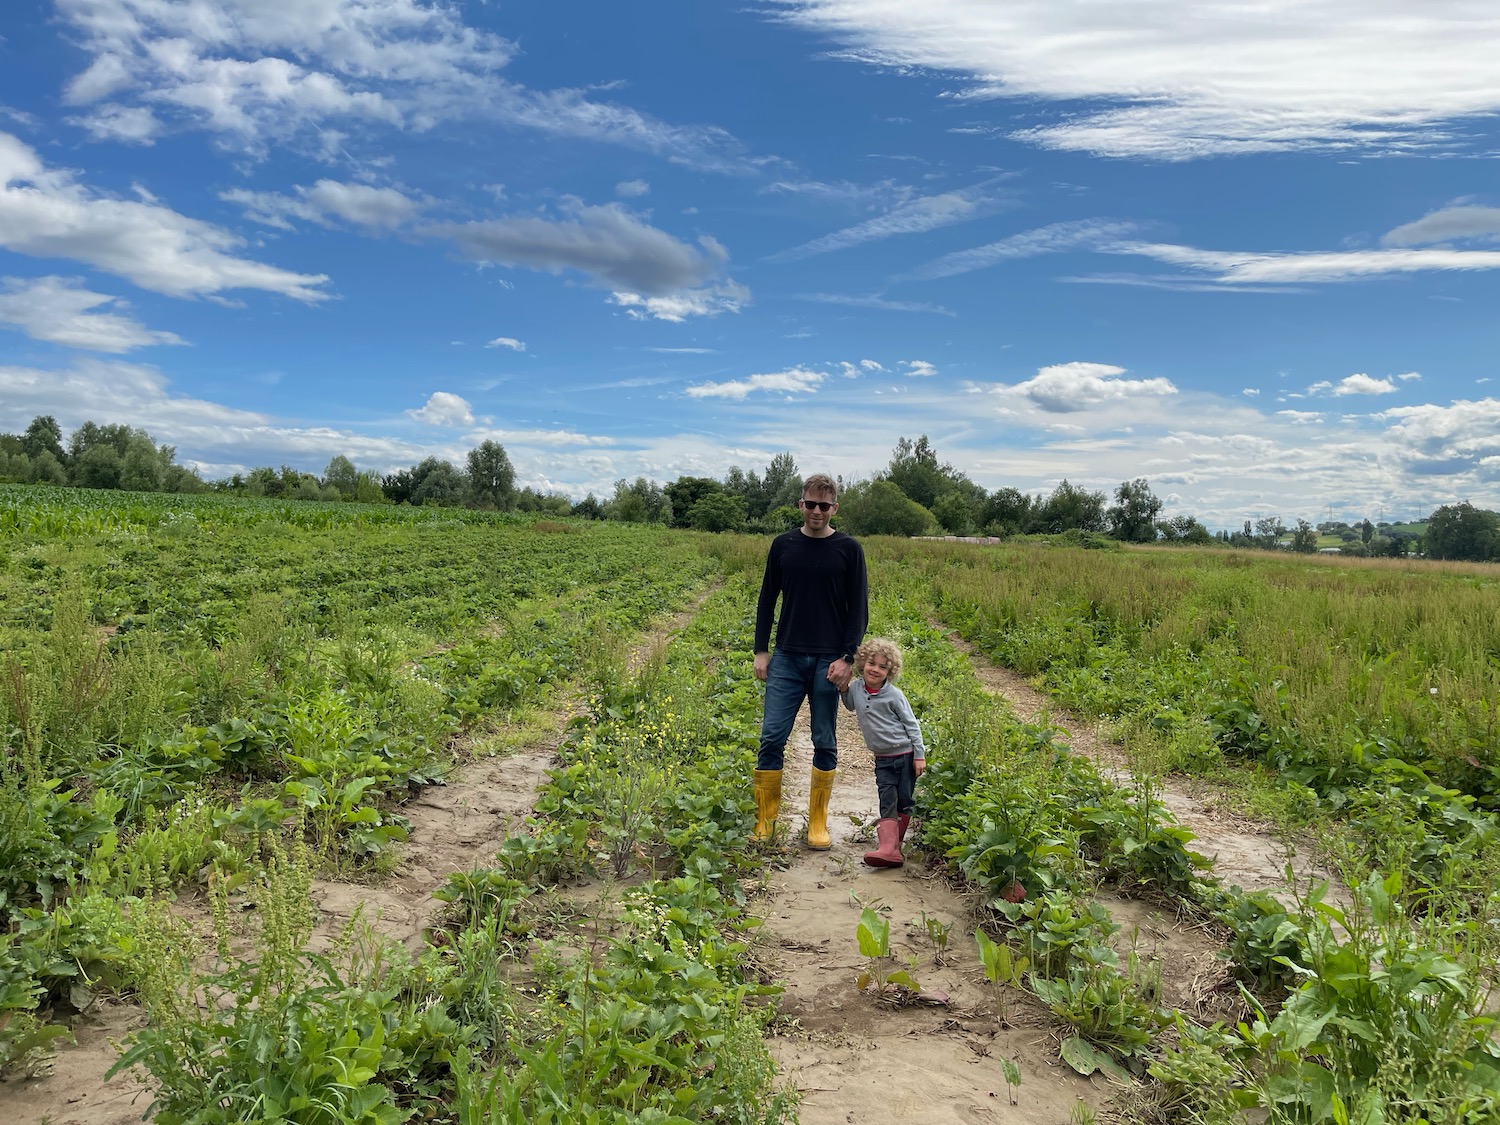 a man and child standing in a field